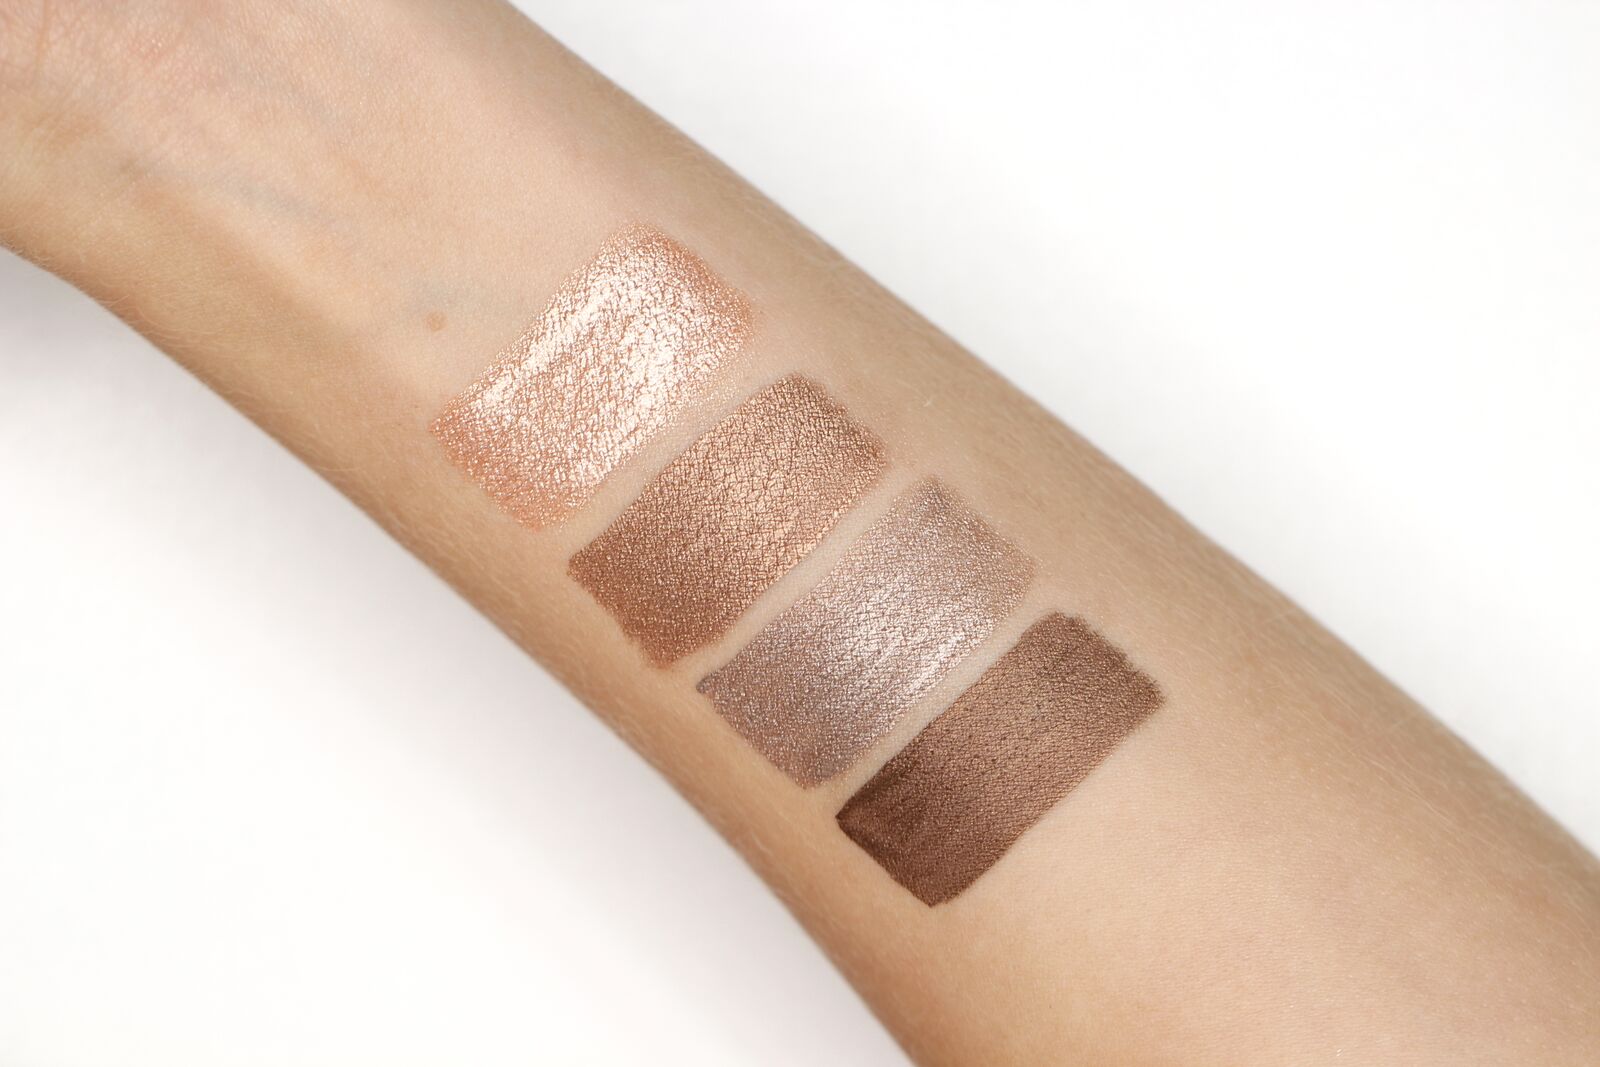 Wander Beauty on Twitter: "Swatches of our Exquisite Eye Liquid Shadows.  From left to right: Champagne, Bronze, Dove Grey, &amp; Mocha  https://t.co/BtFAG9r6HU" / Twitter